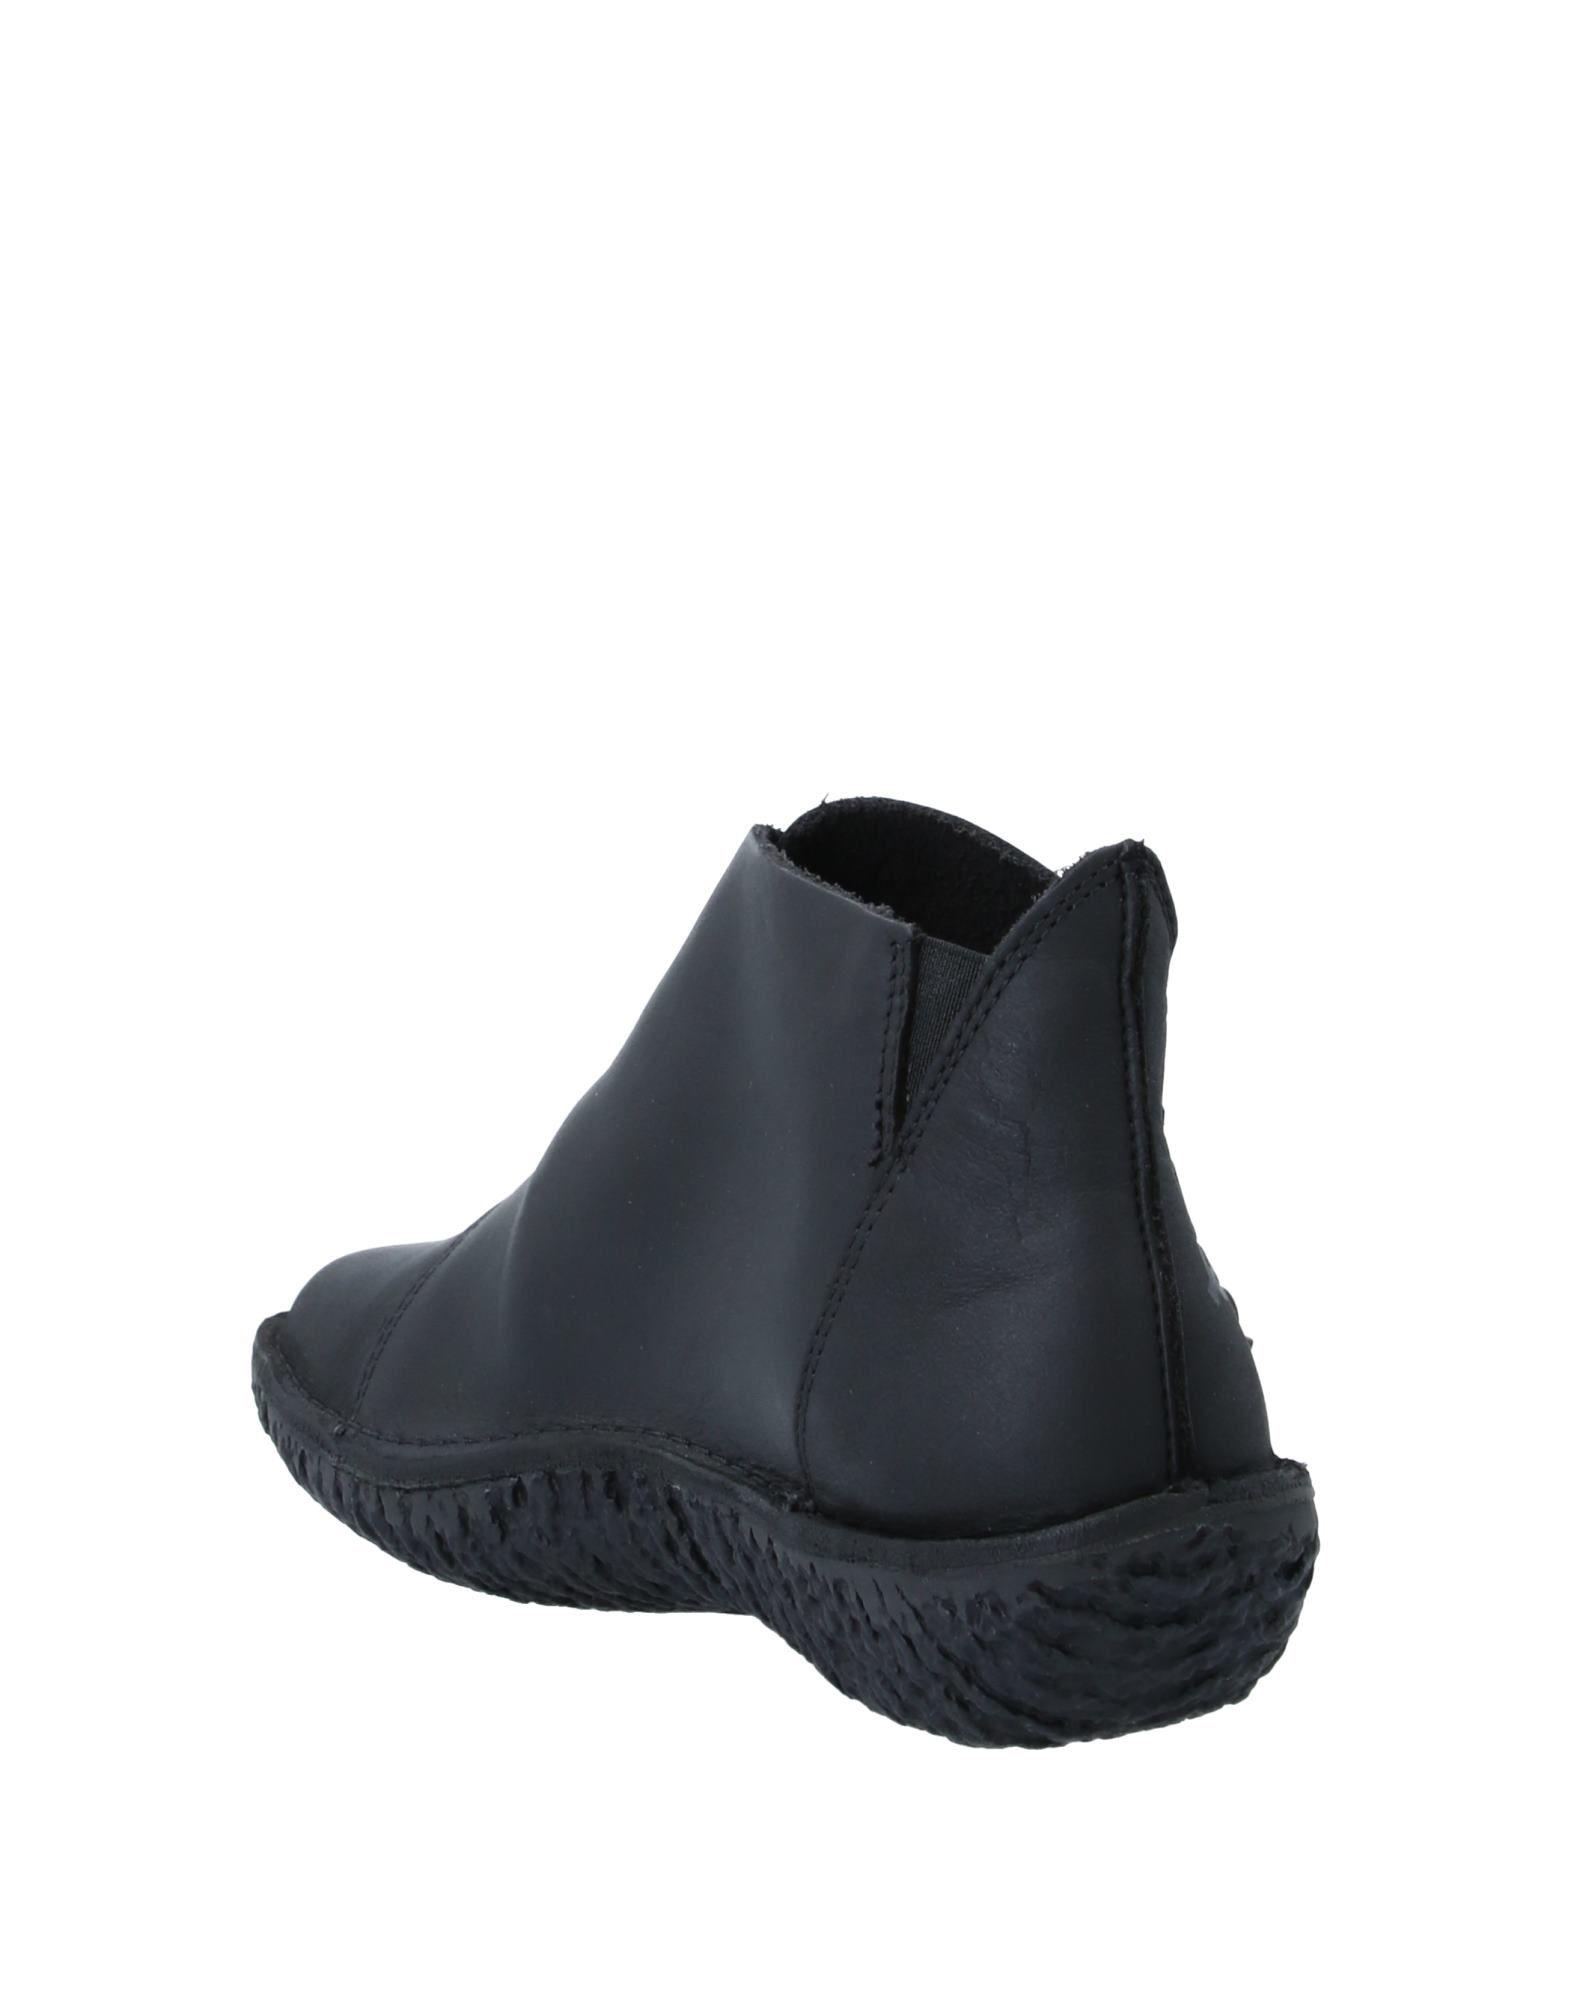 Loints of Holland Leather Ankle Boots in Black - Lyst